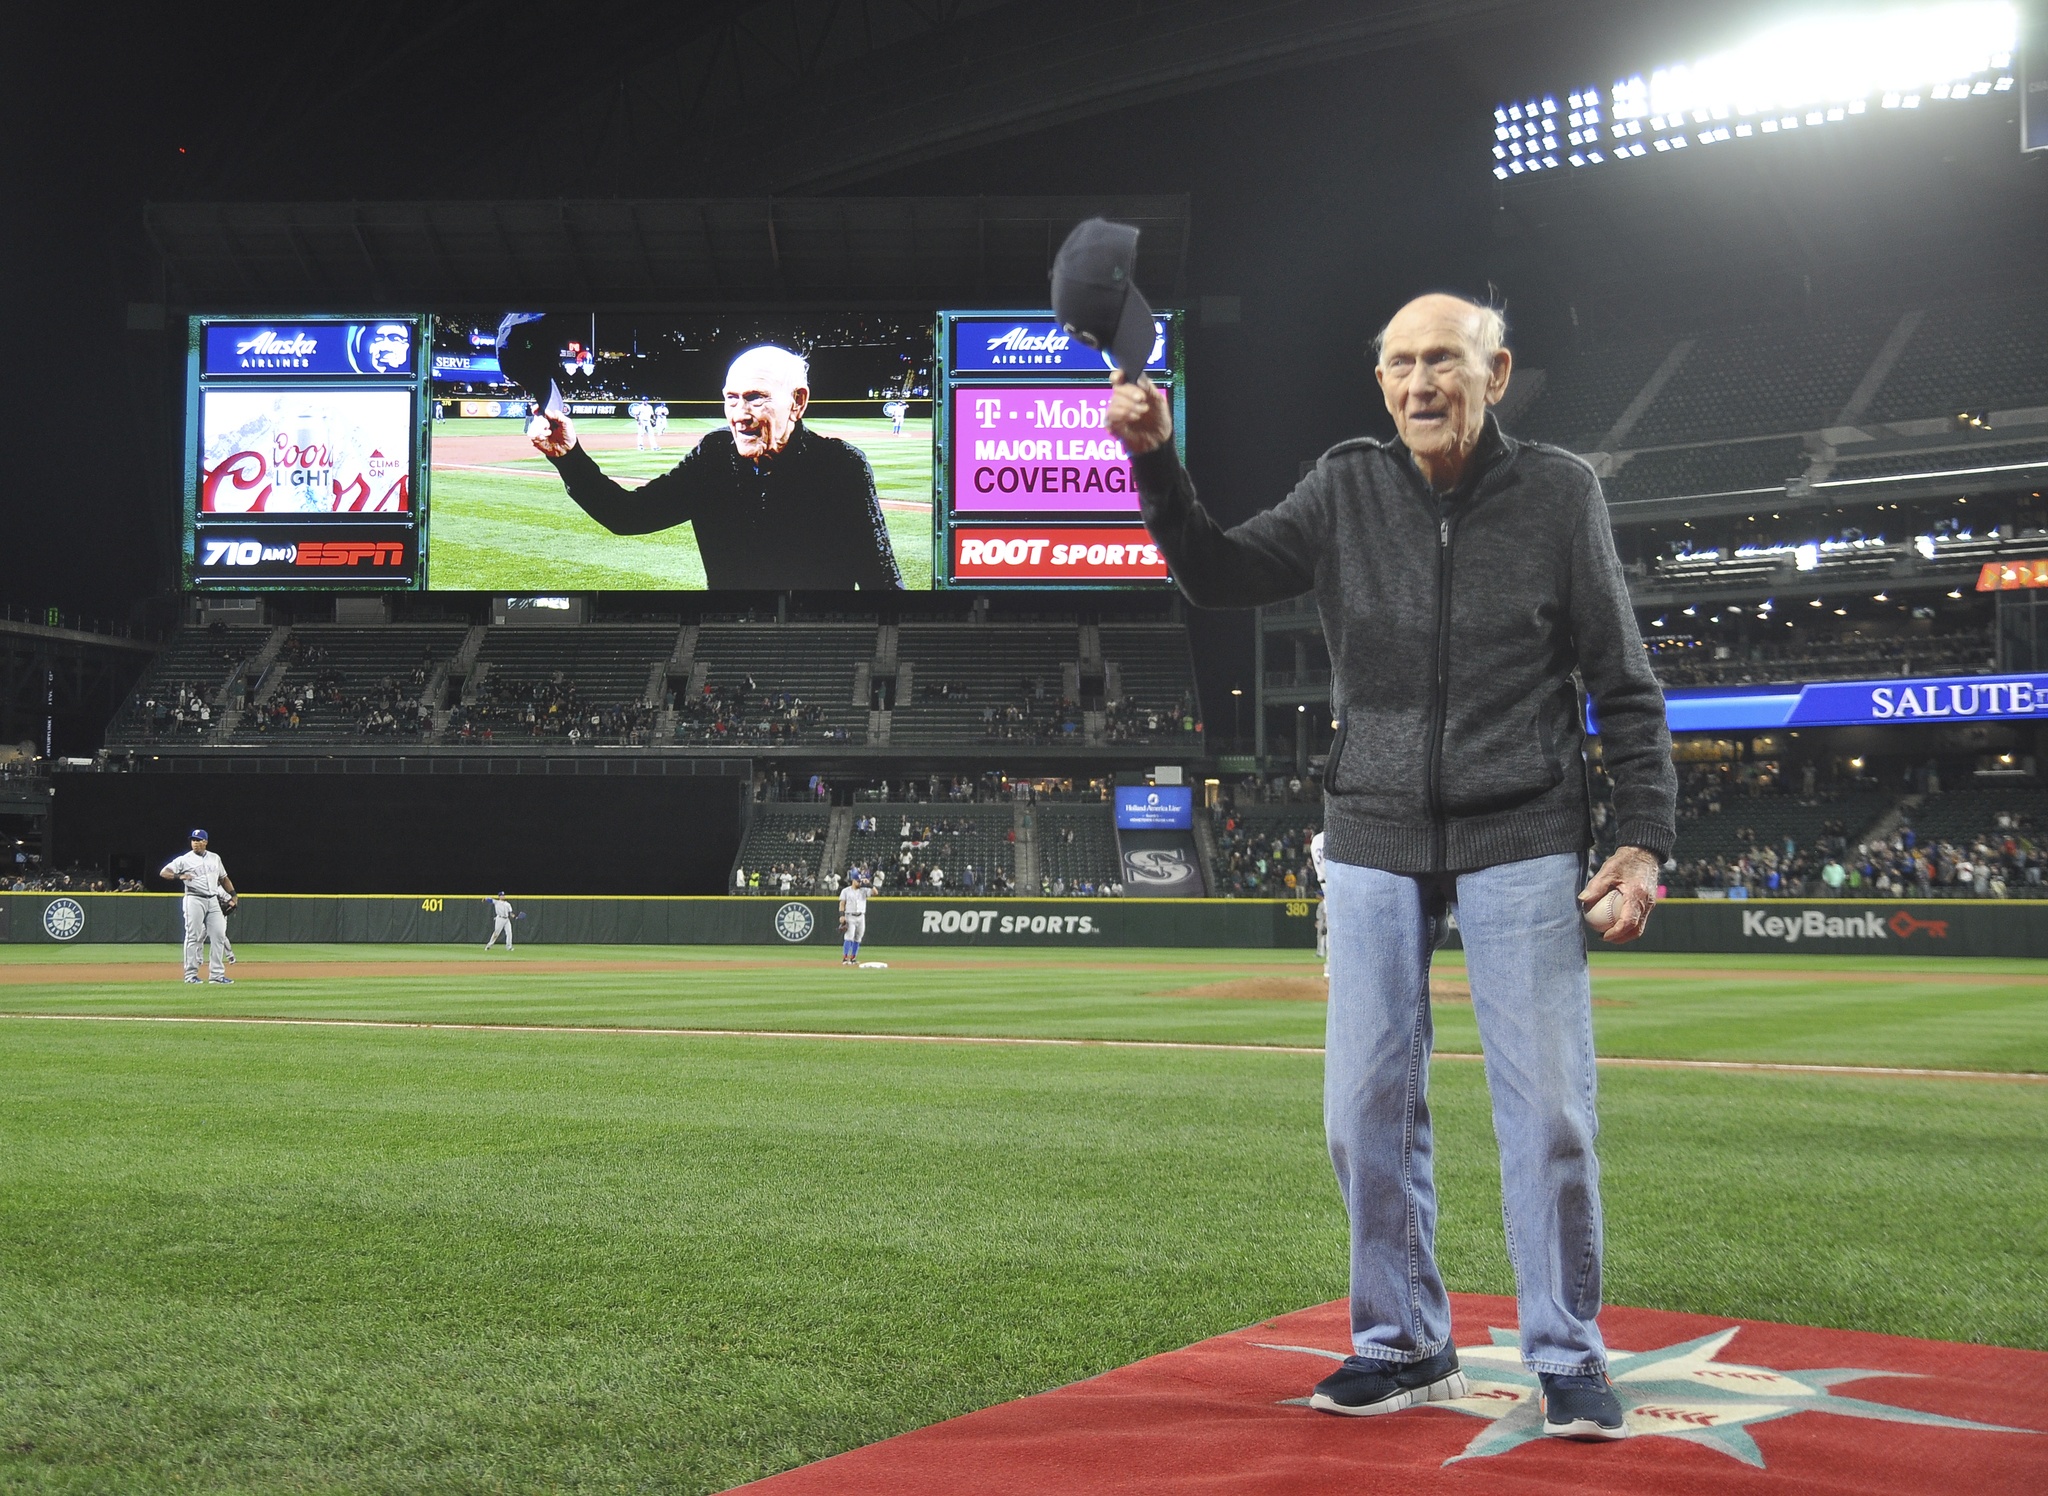 Sequim’s own Vern Frykholm Sr. gets a grand birthday party at Seattle’s Safeco Field